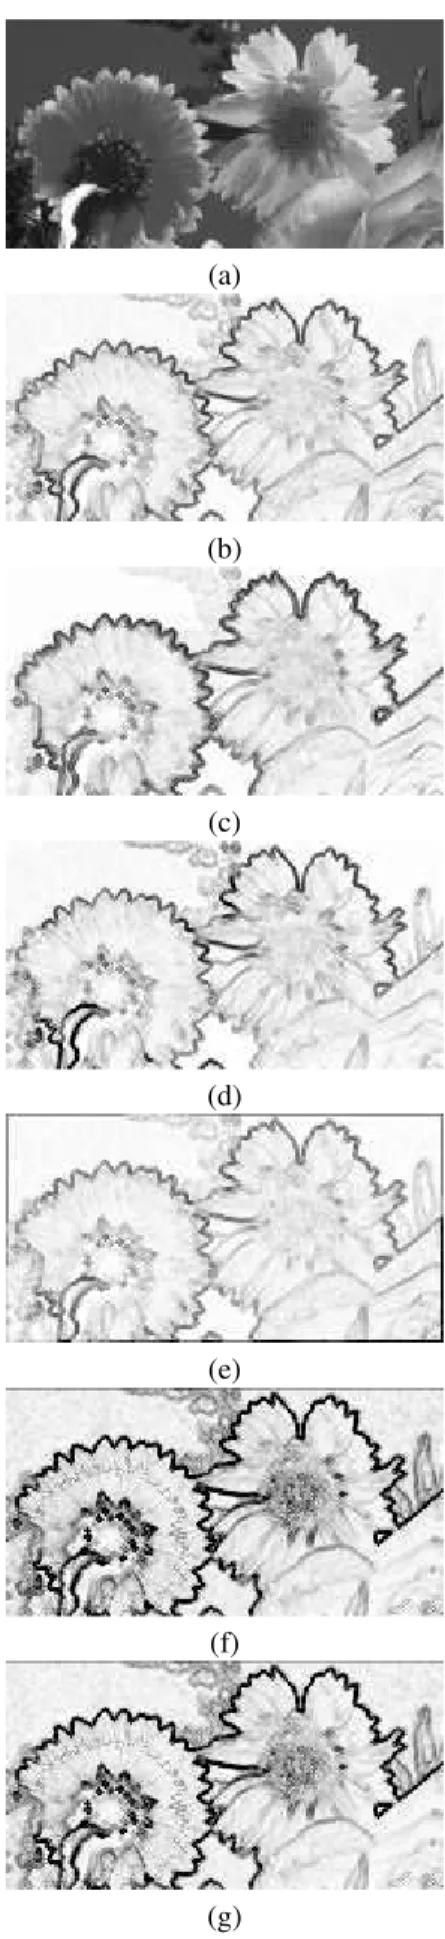 Figure 6. Segmentation Results - Flowers: (a) Set of Markers. (b-e) Gradient I to IV 